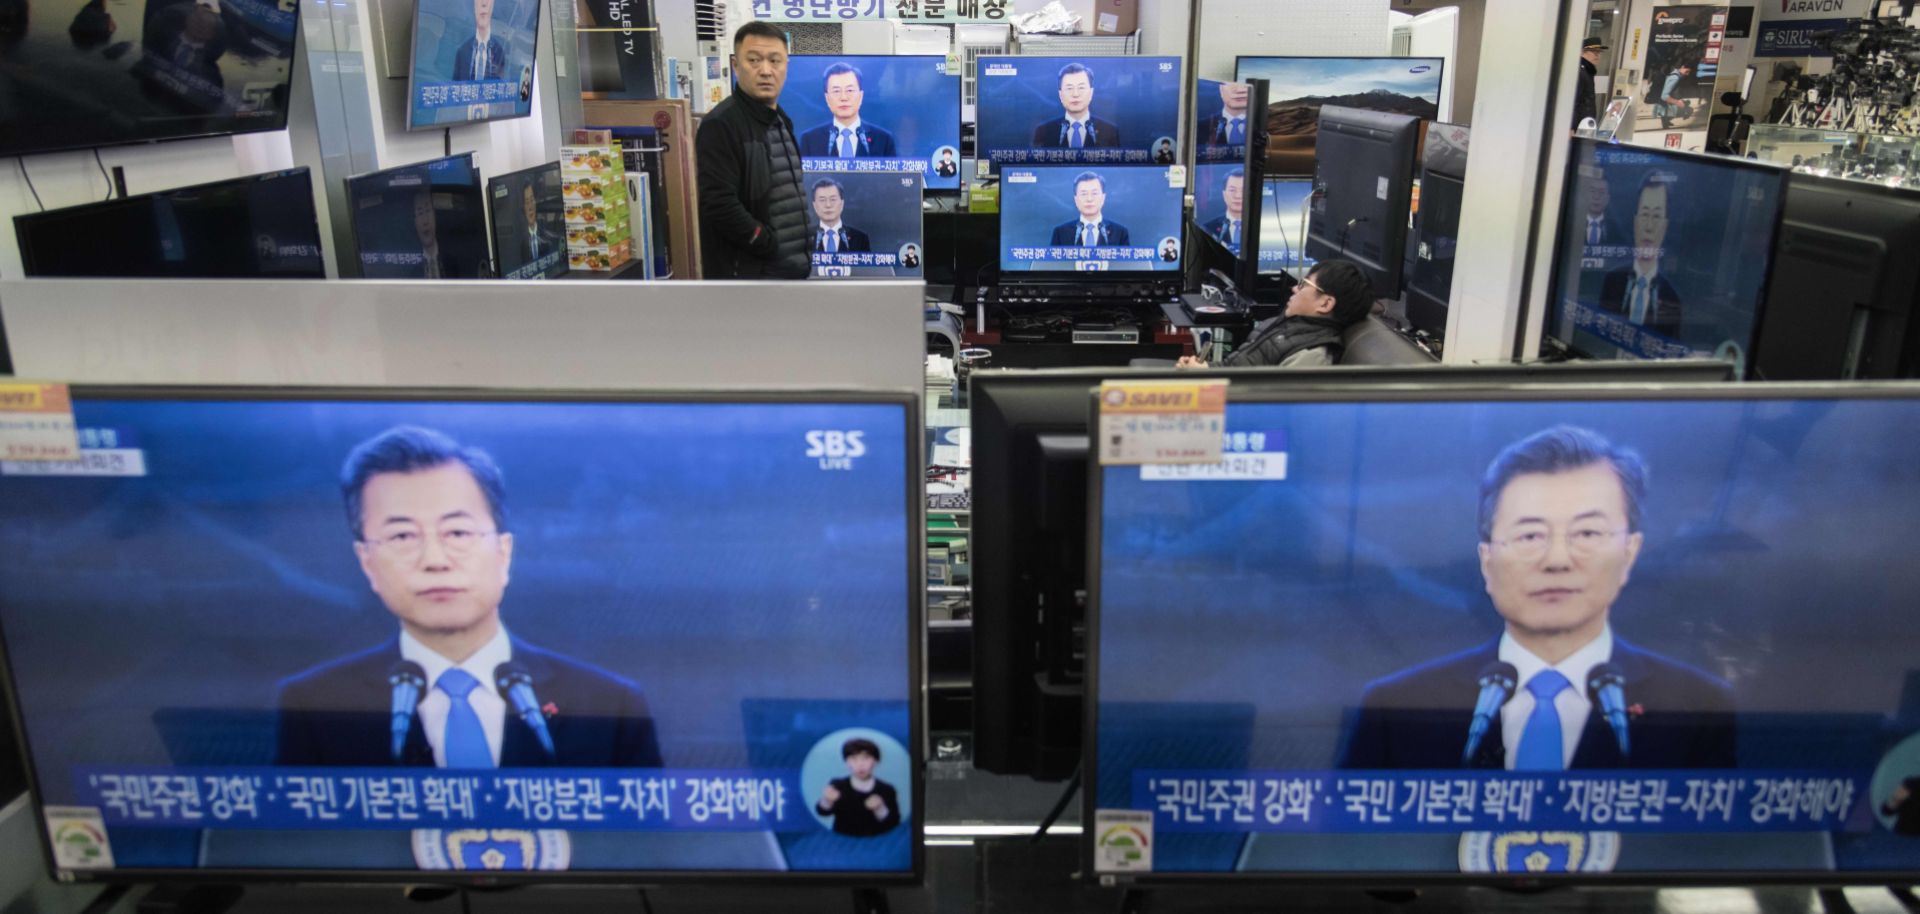 Televisions at a mall in Seoul show South Korean President Moon Jae In speaking on Jan. 10, 2018, the day after North and South Korea held face-to-face talks for the first time in more than two years.